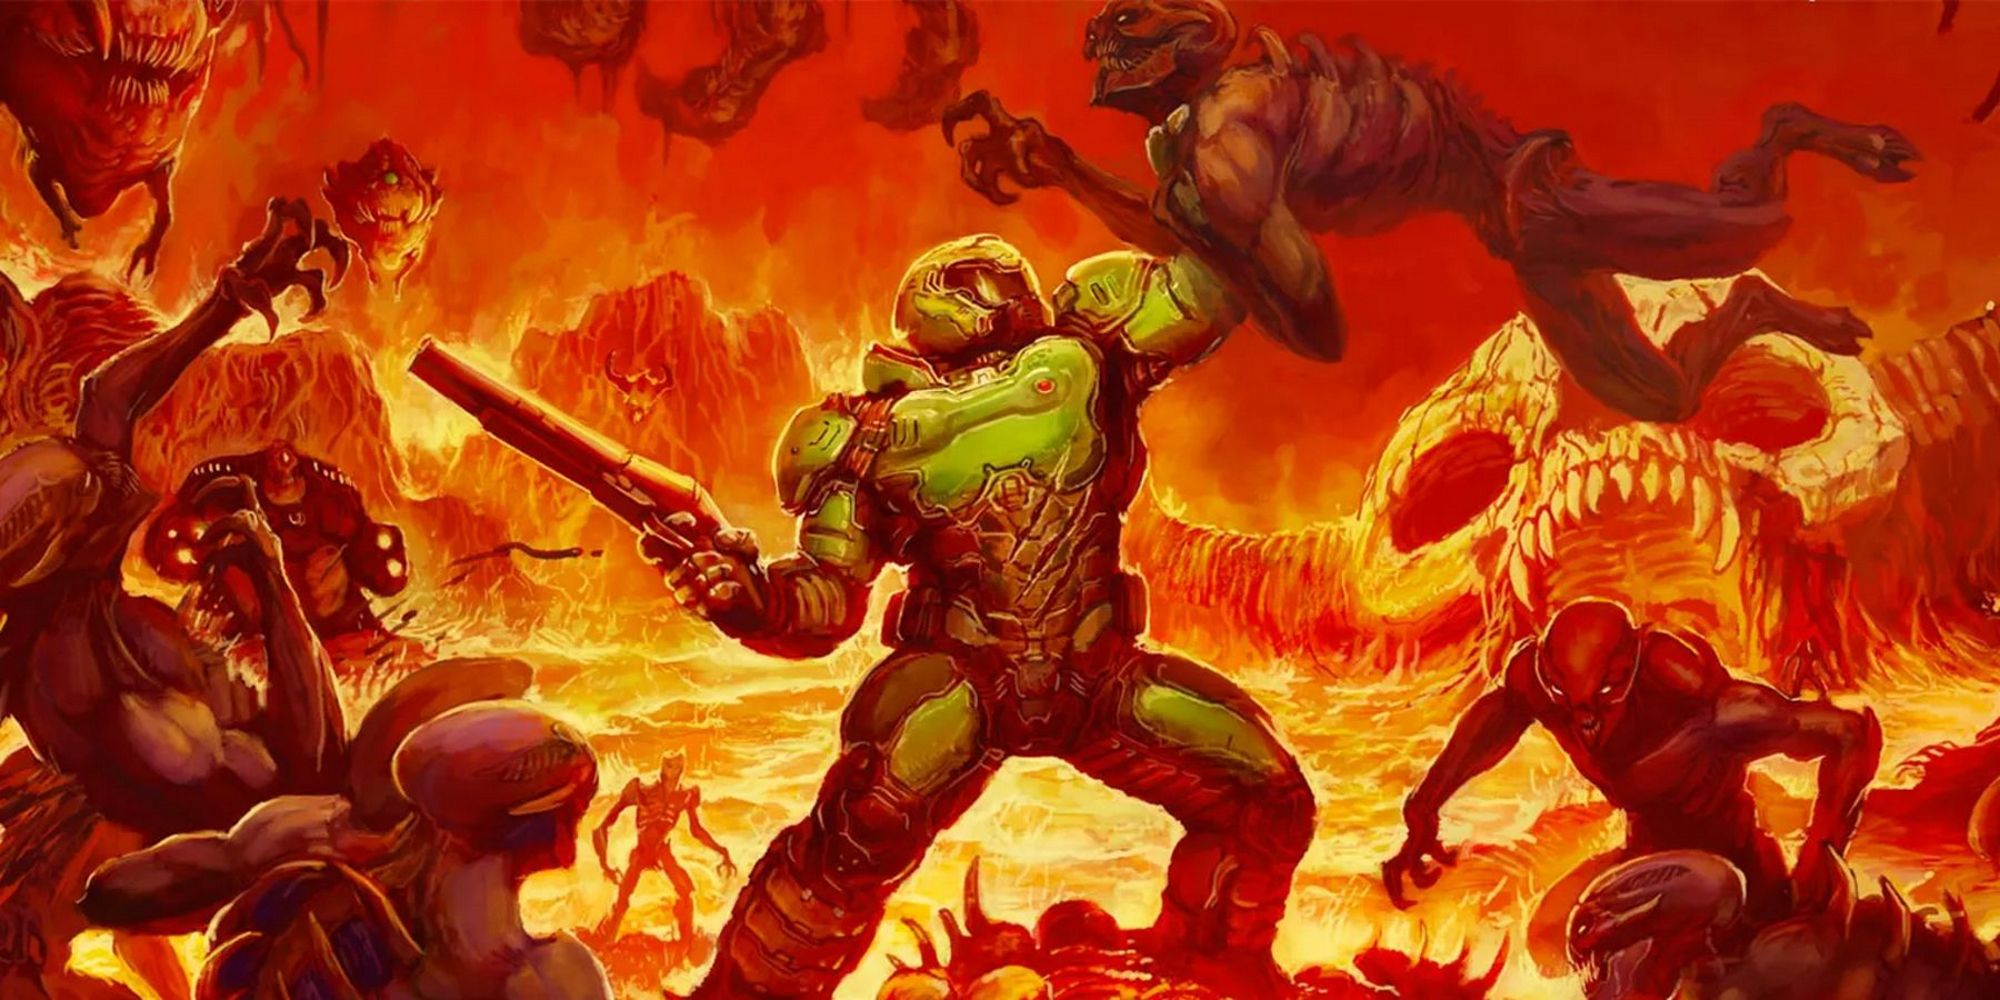 Doomguy holding a goblin by the neck